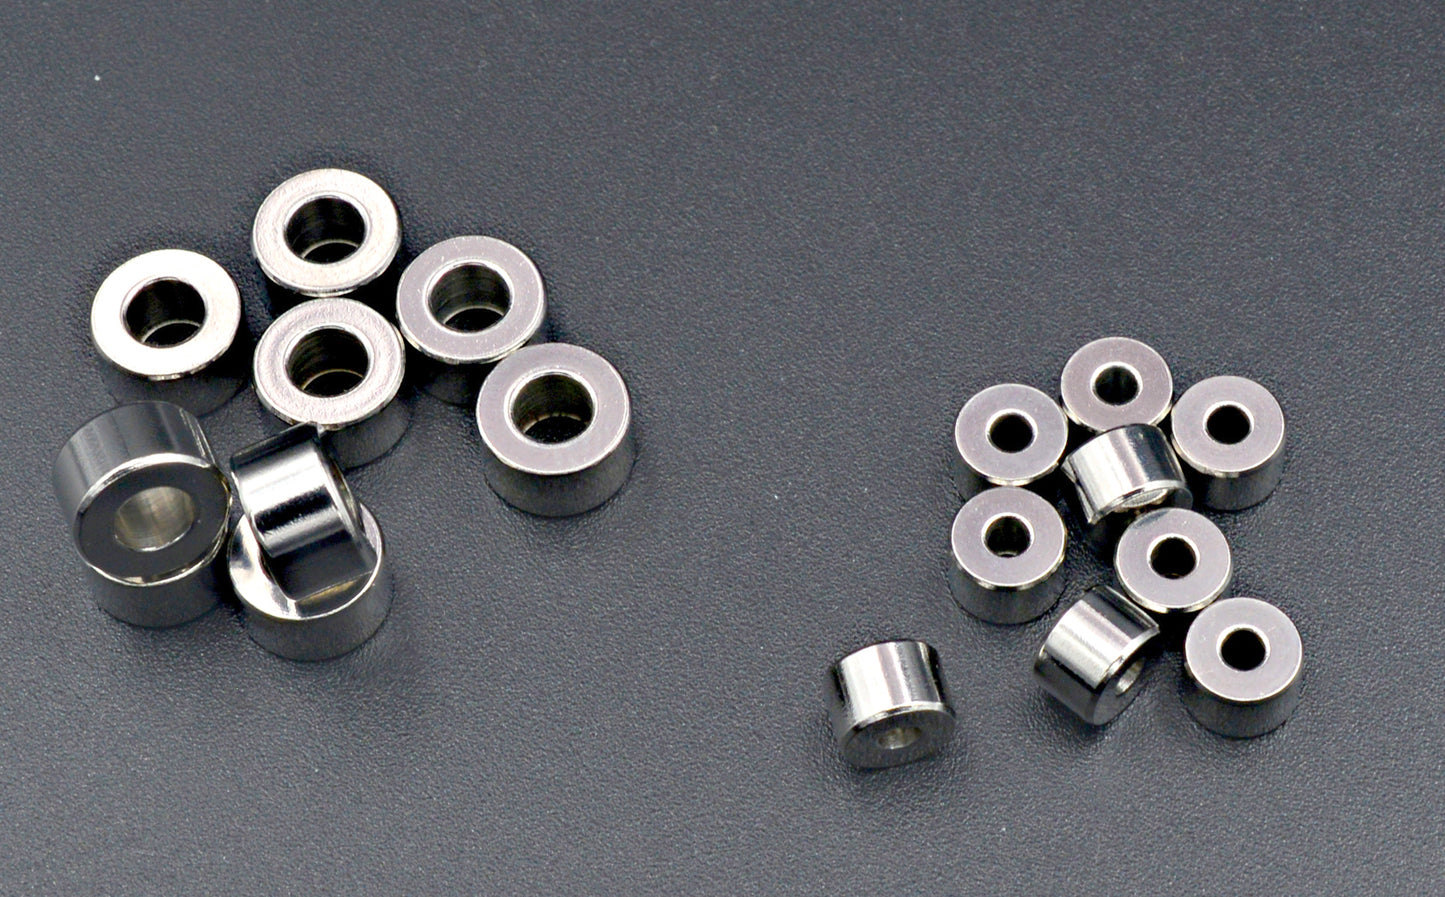 Stainless Steel Cylinder Roundel Plain Spacer Beads Size 6x4mm, 8x4mm Jewelry Finding Supply For Jewelry Making